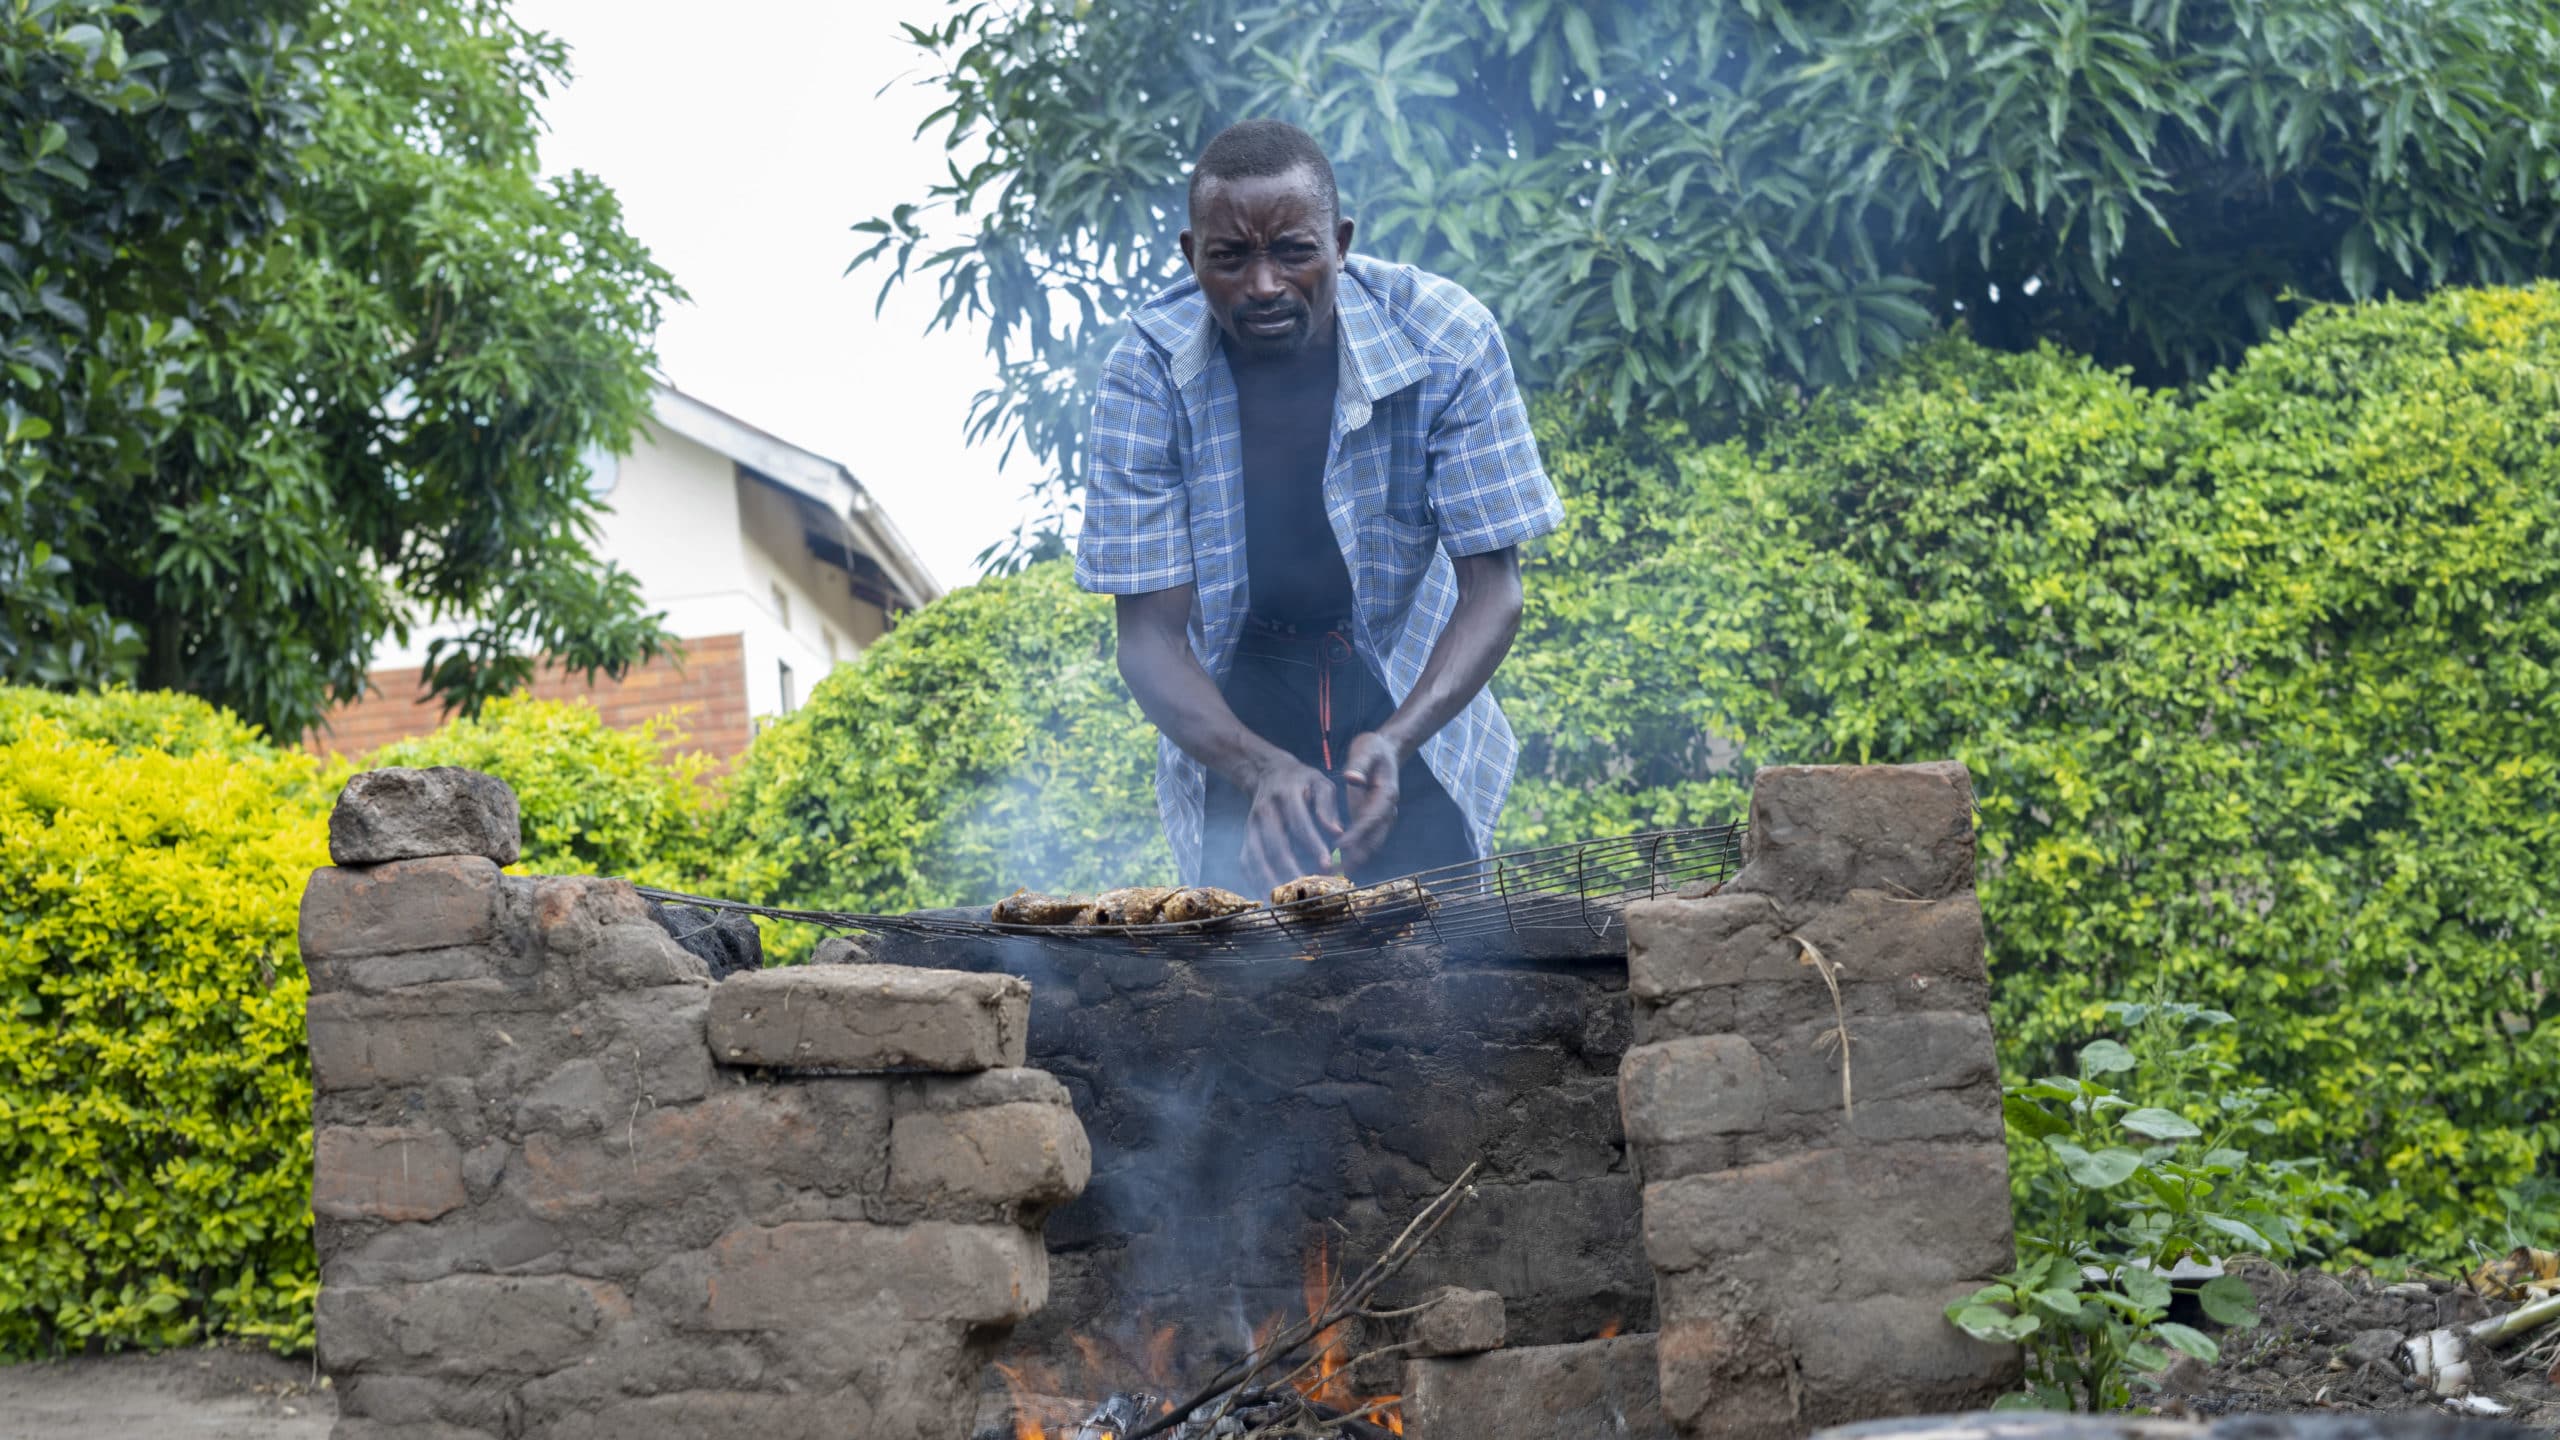 From Small Savings to Smoked Fish – An Entrepreneur’s Story